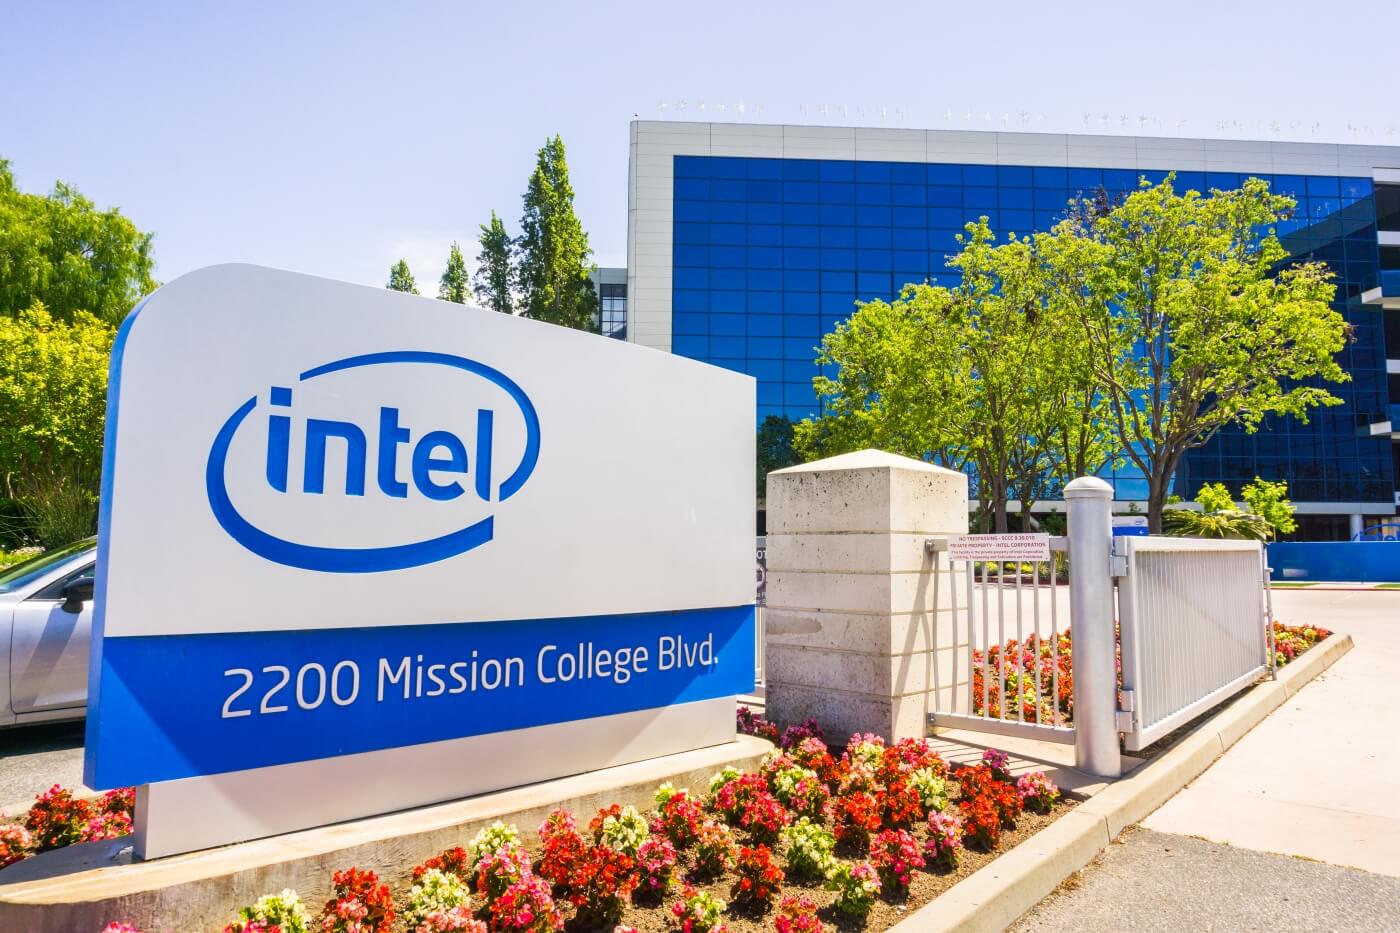 Intel CEO Bob Swan: reshaping company culture is key to leading the turnaround at Intel